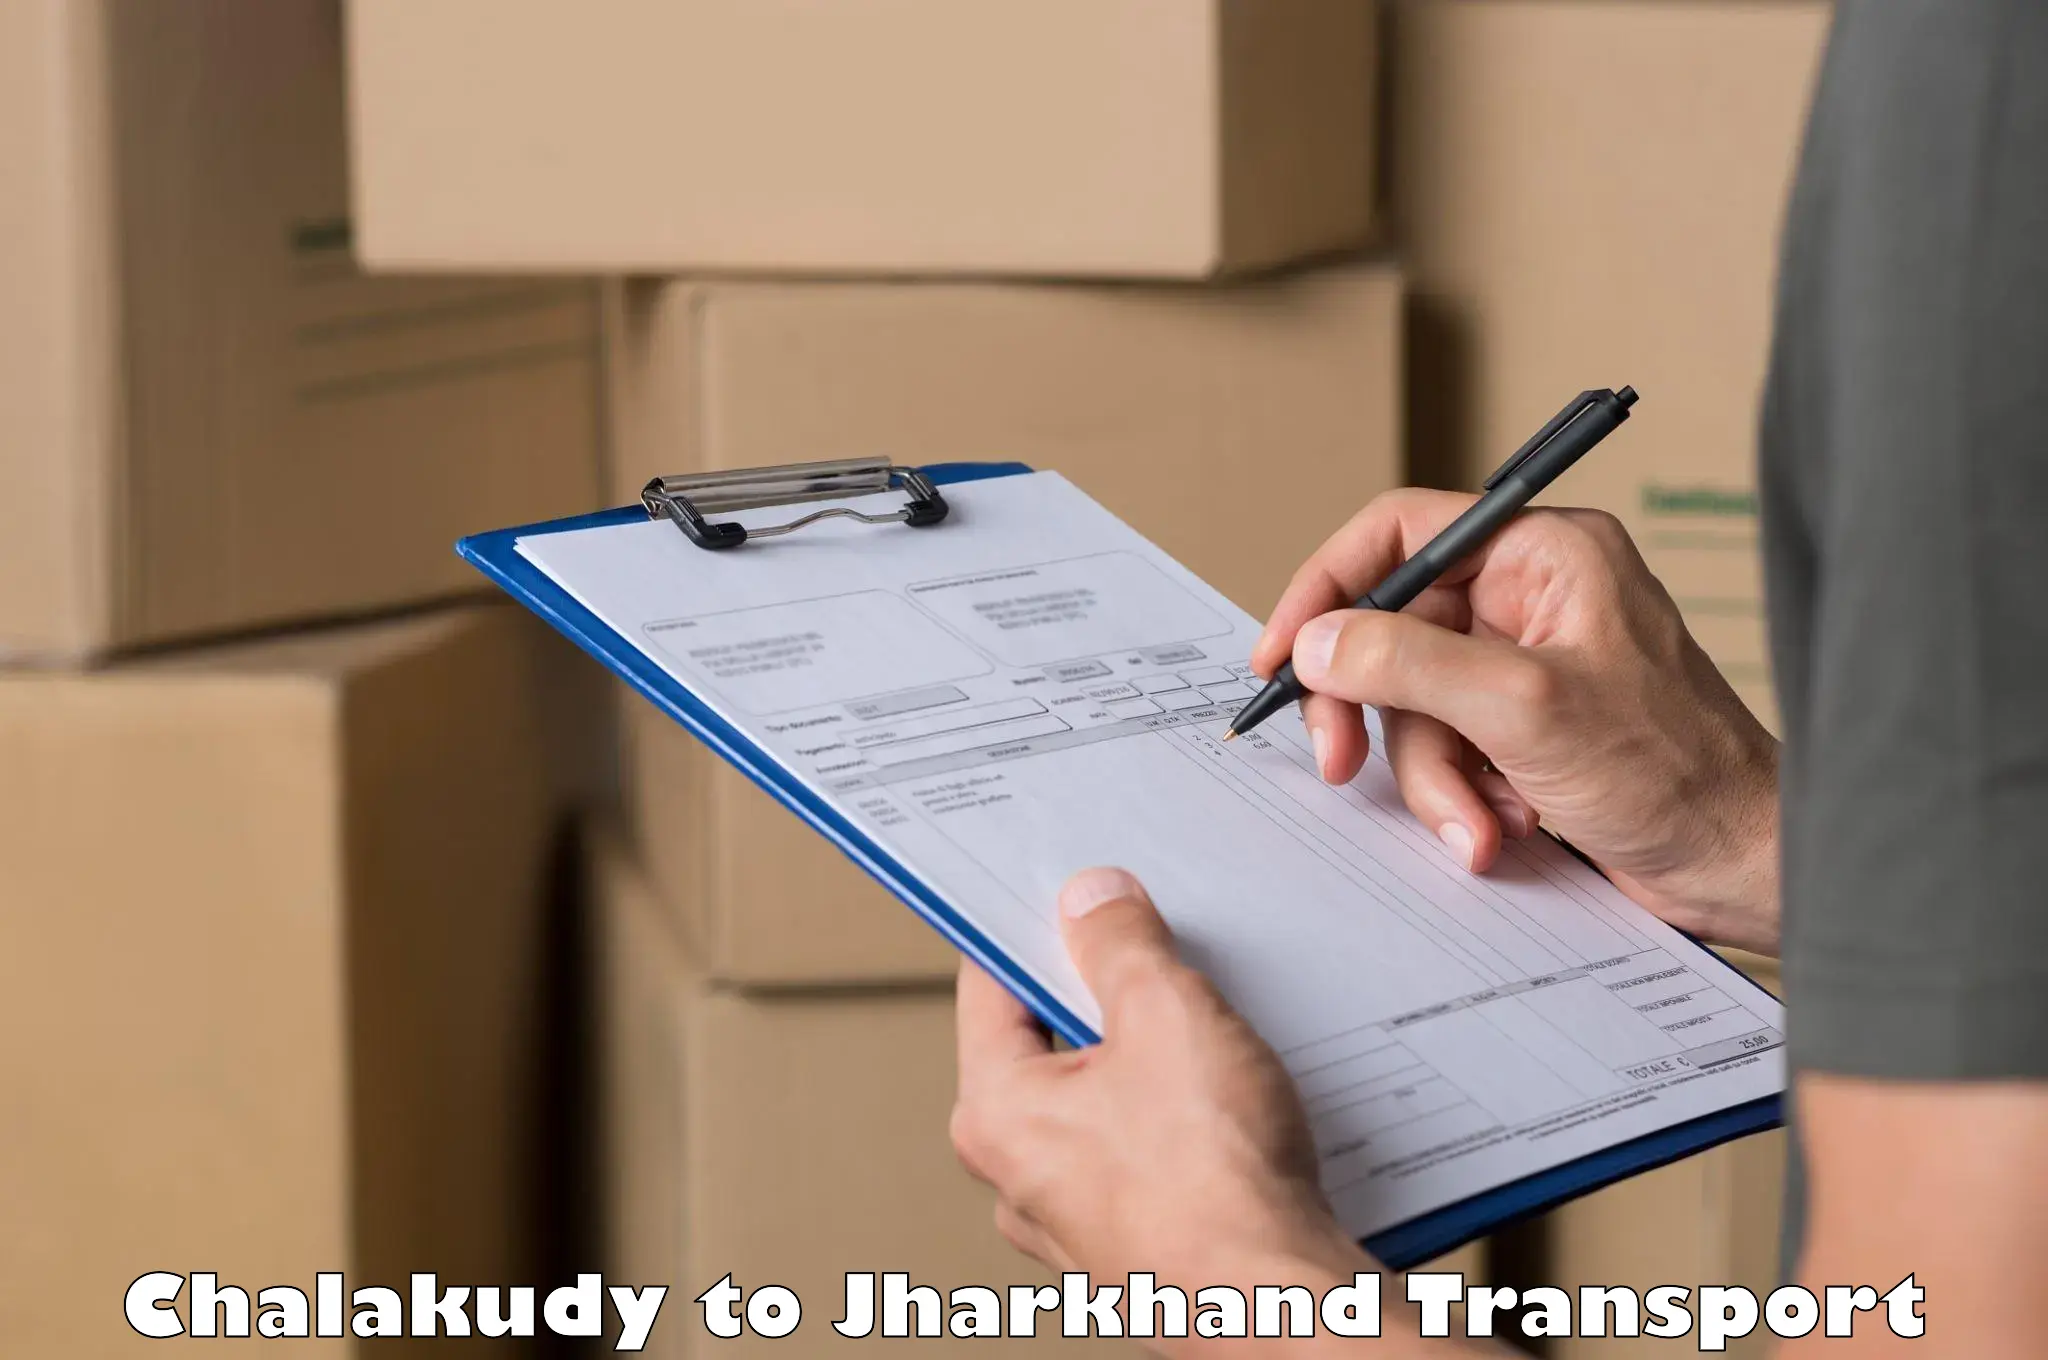 Container transport service in Chalakudy to Jharkhand